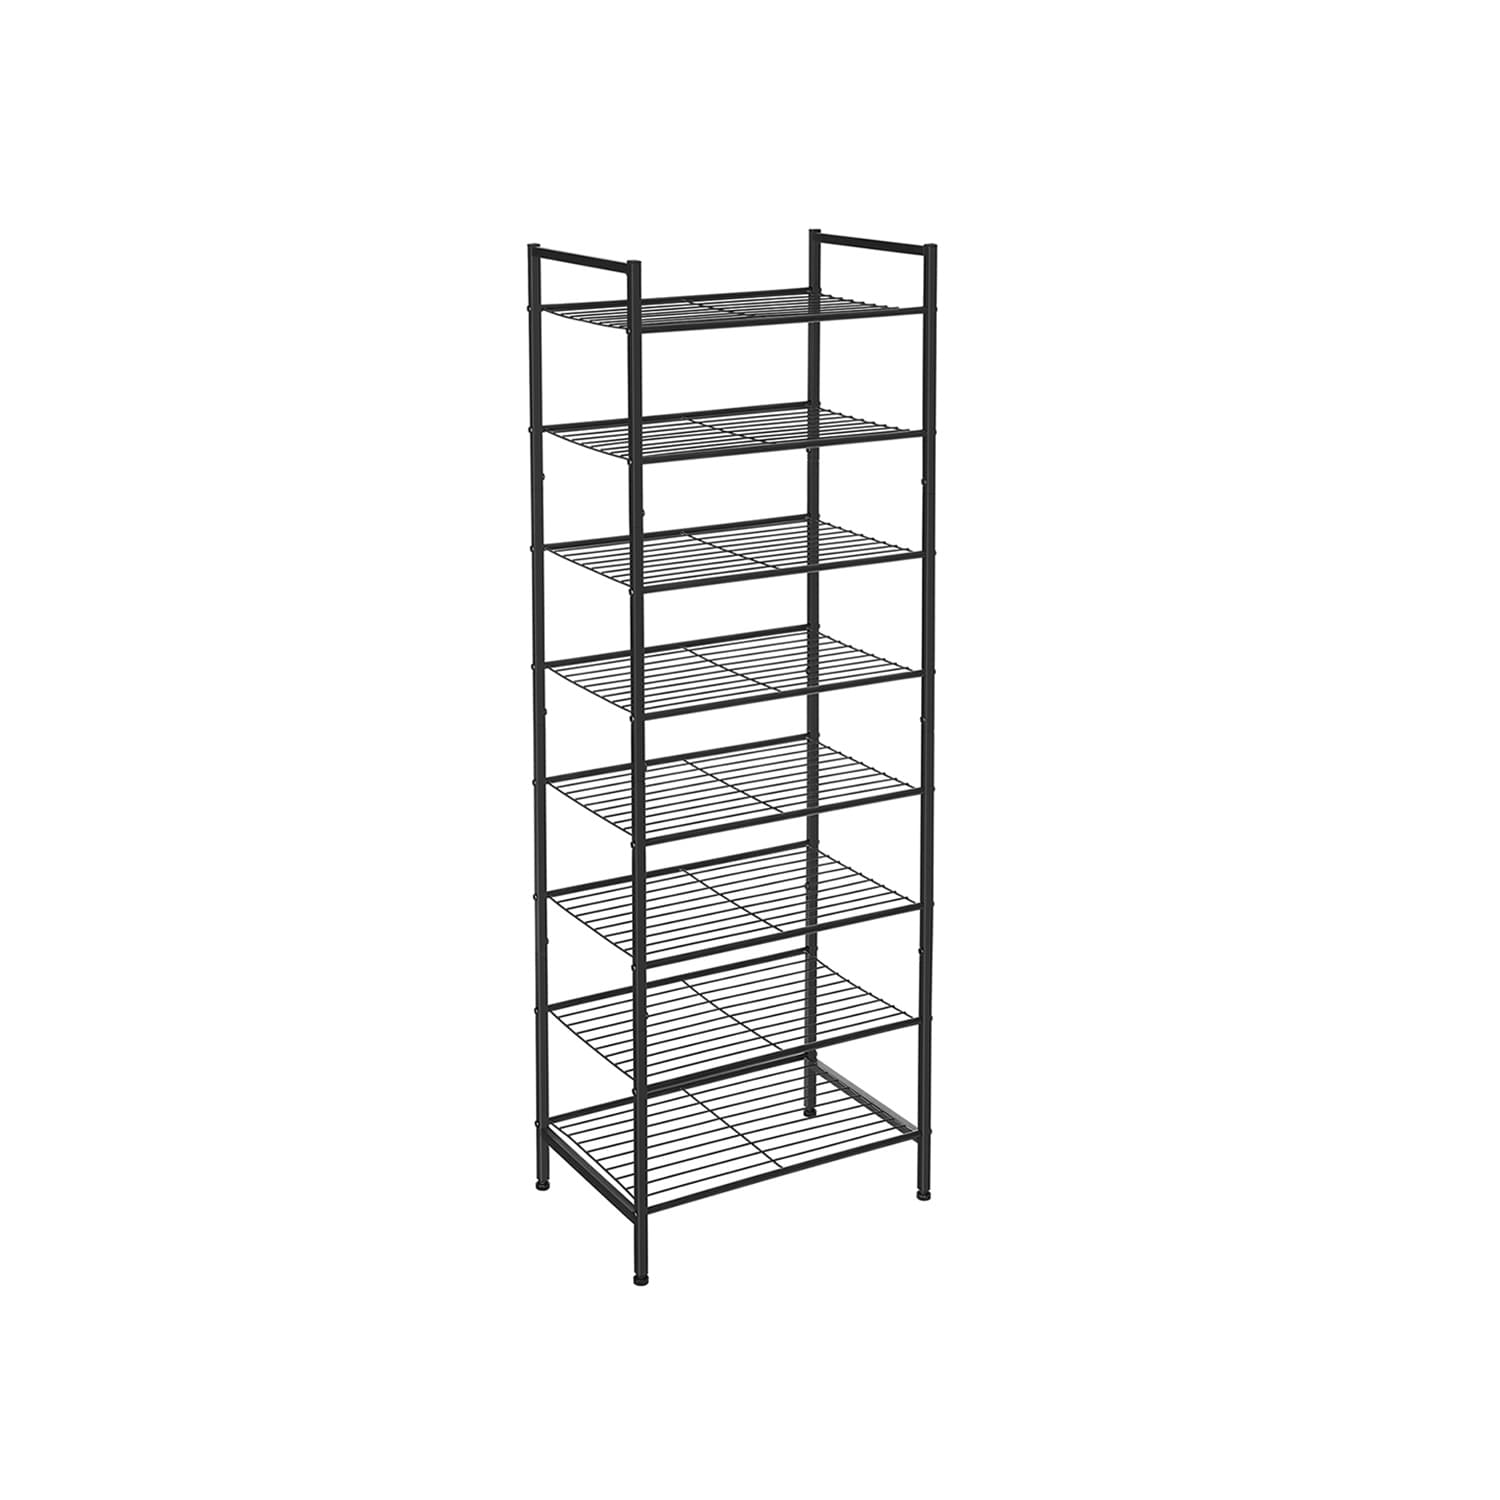 https://ak1.ostkcdn.com/images/products/is/images/direct/bd4d62cb9c2730093c2b38ea3a9e8be5fcf71f4e/Shoe-Rack-8-Tier-Tall-Shoe-Storage-Organizer%2C-Slim-Shoe-Stand-Holder-for-16-24-Pairs%2C-Stackable-Vertical-Shoe-Tower.jpg